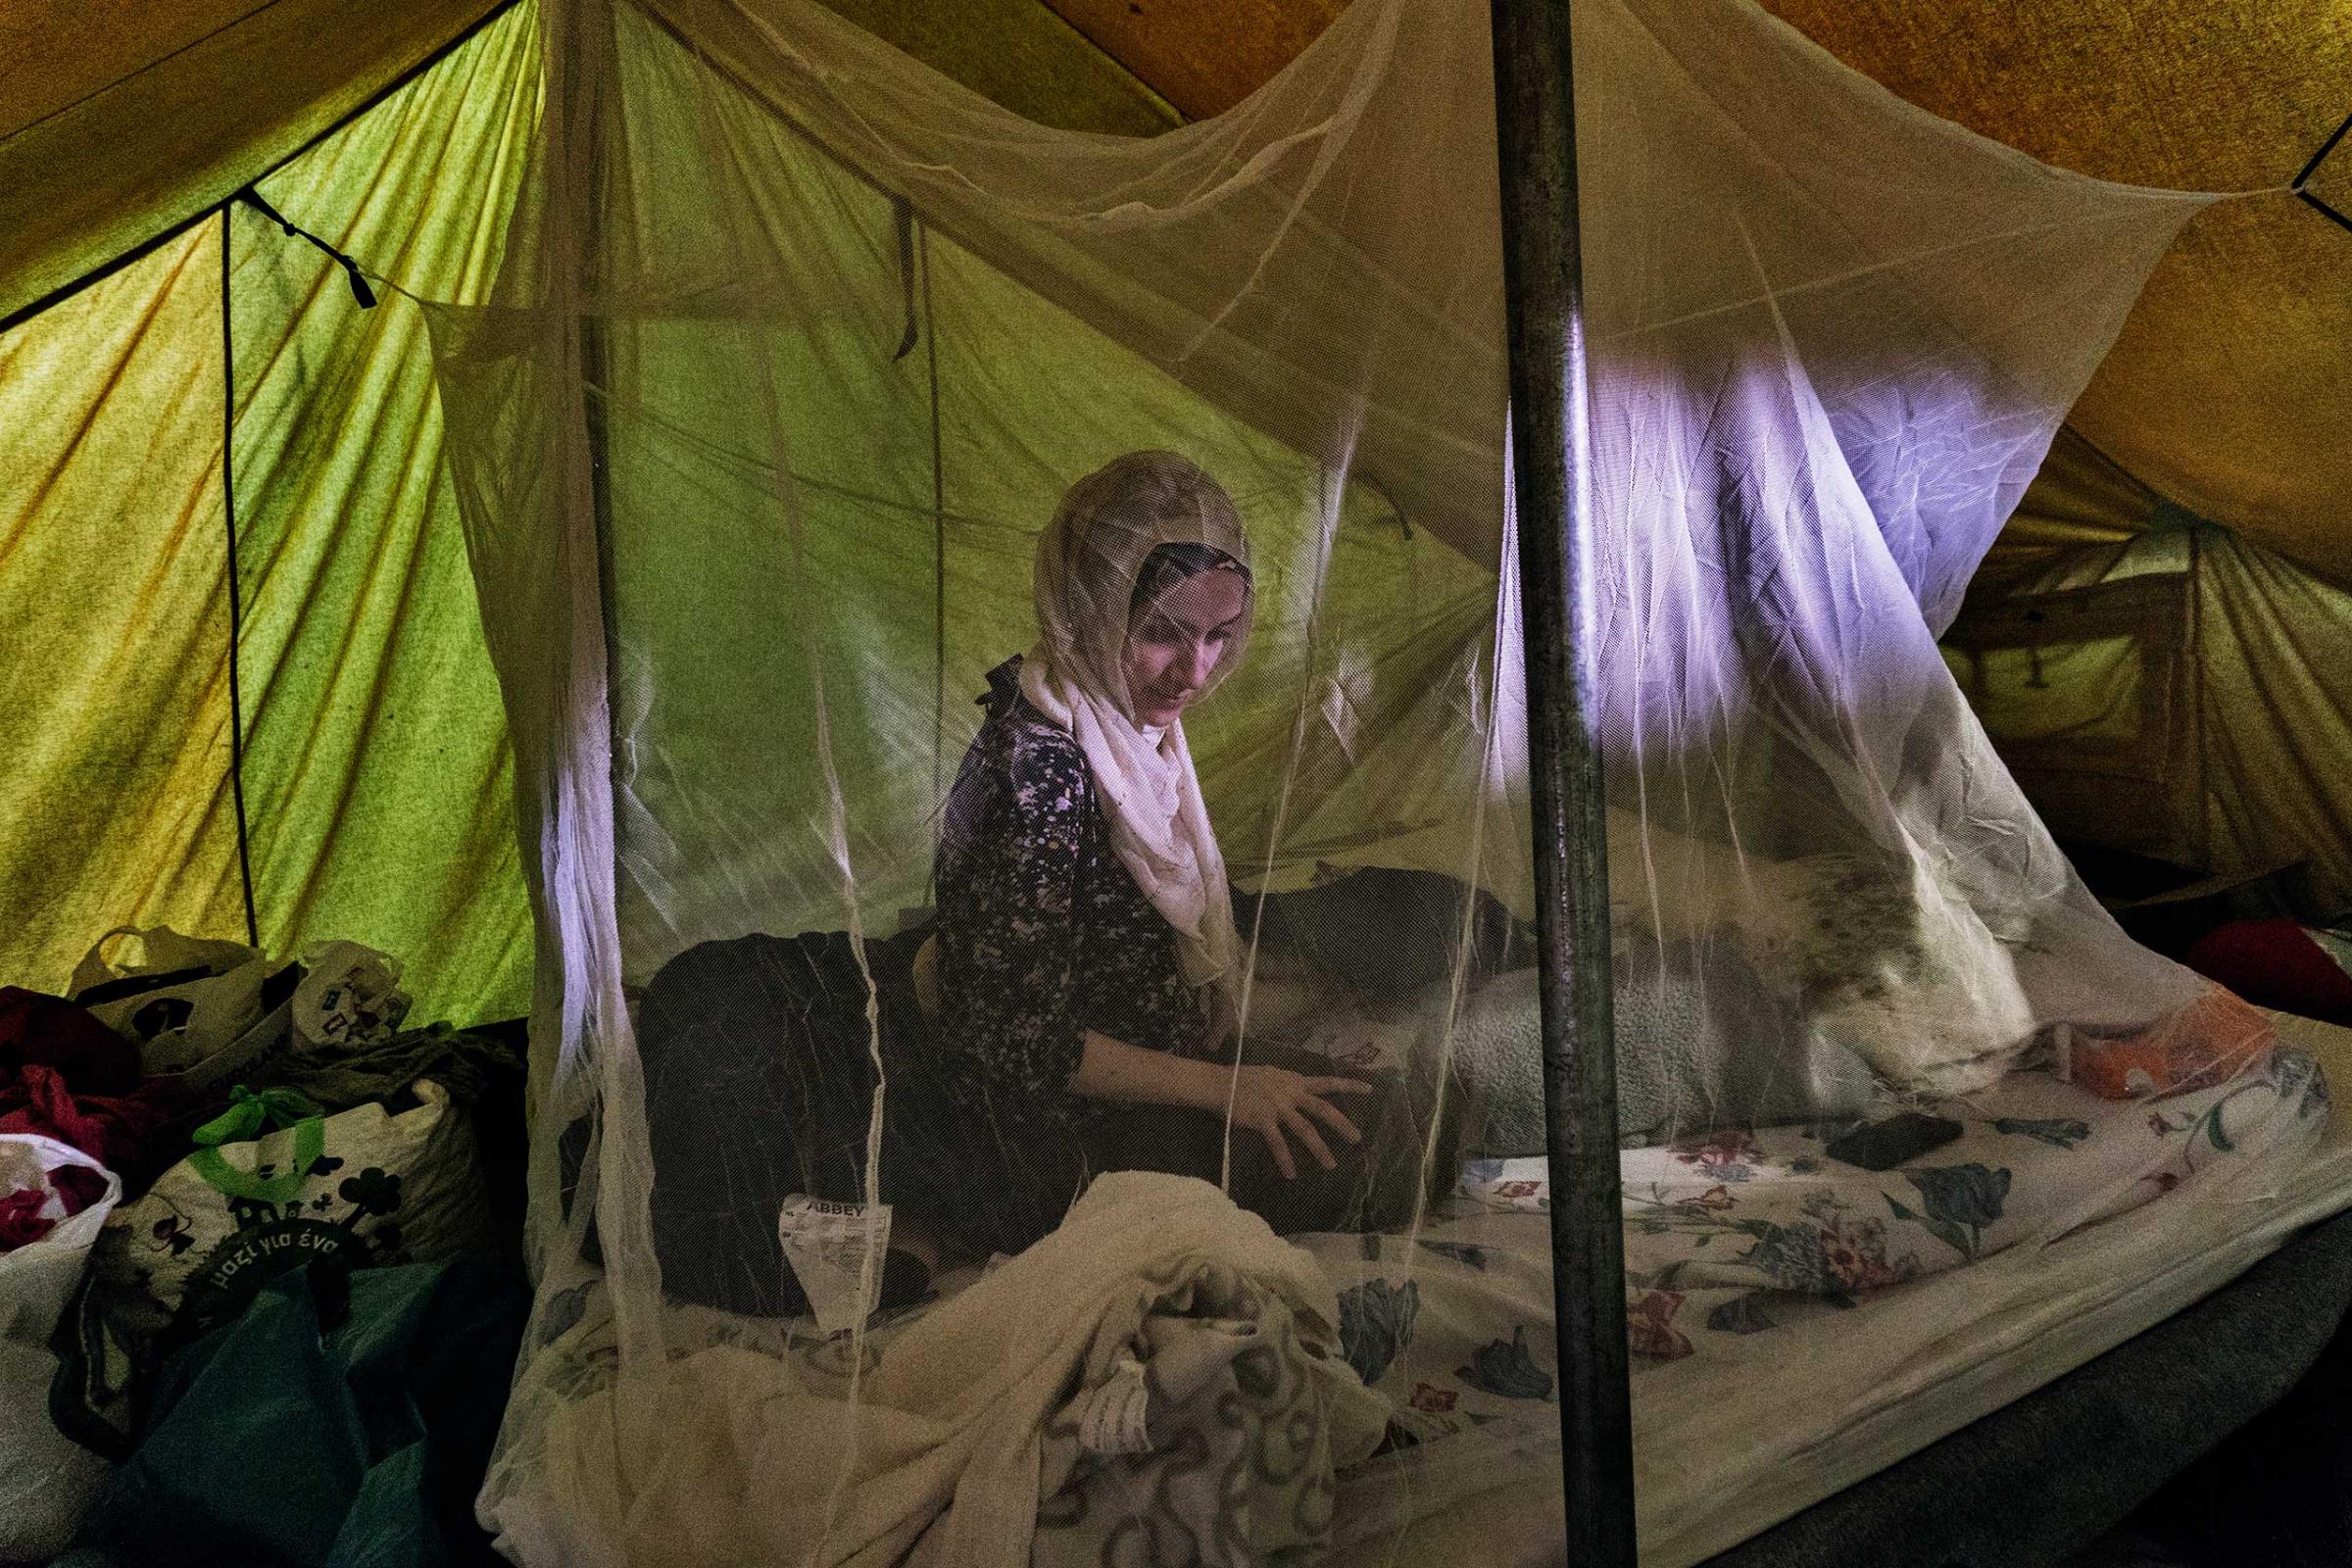 Taimaa Abazli, 24, with her newborn daughter, Helen, born by C-section on Sept. 13 in their tent in the Karamalis refugee camp in Thessaloniki, Greece, Sept. 26, 2016.